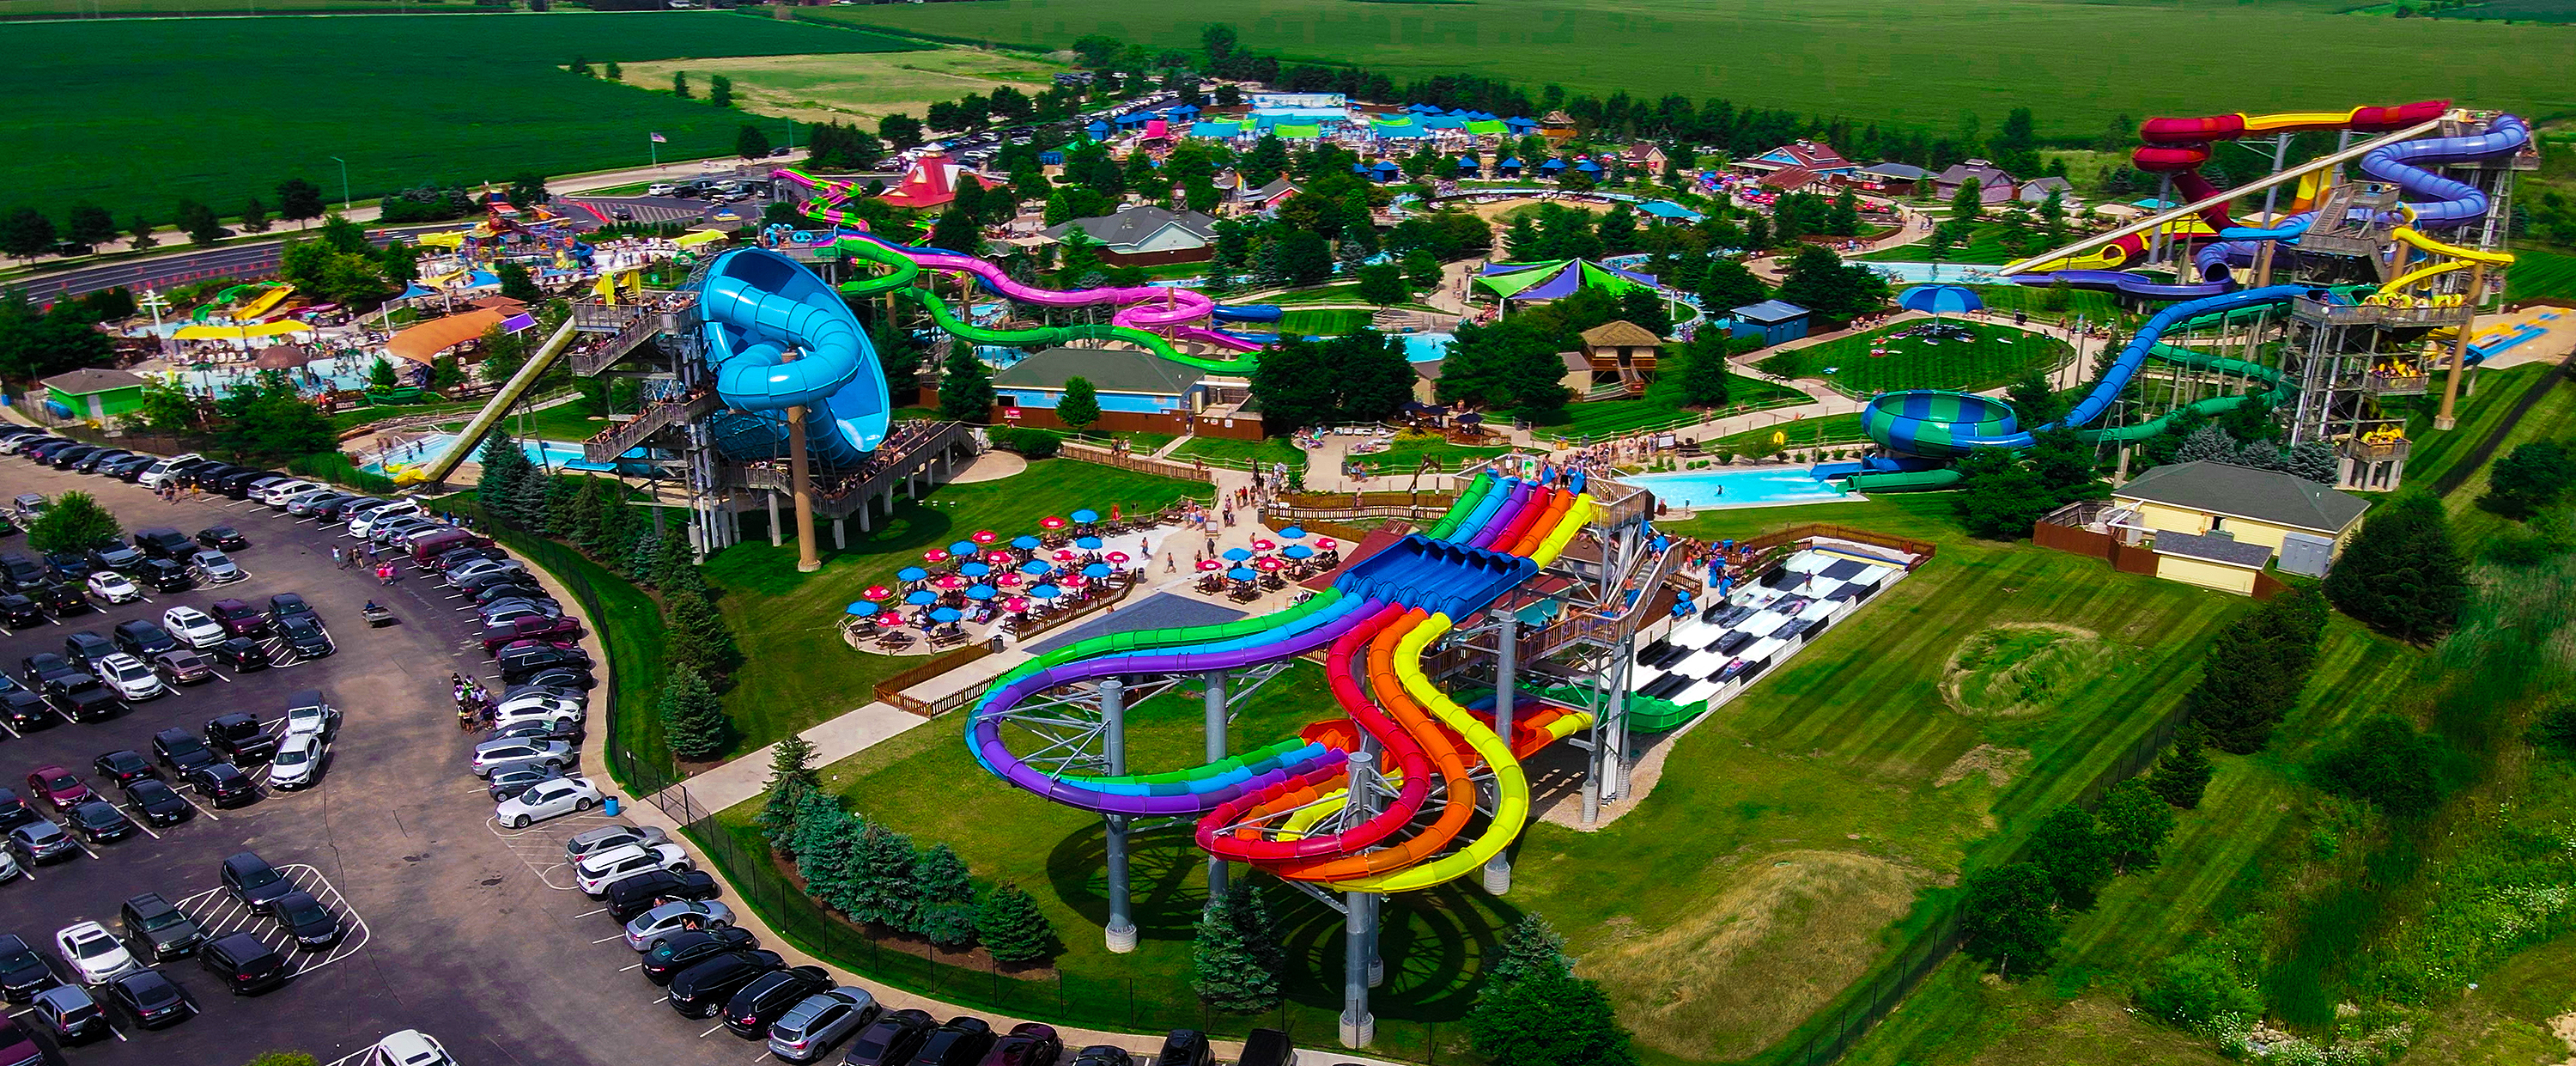 Illinois' Largest Waterpark to Open in June